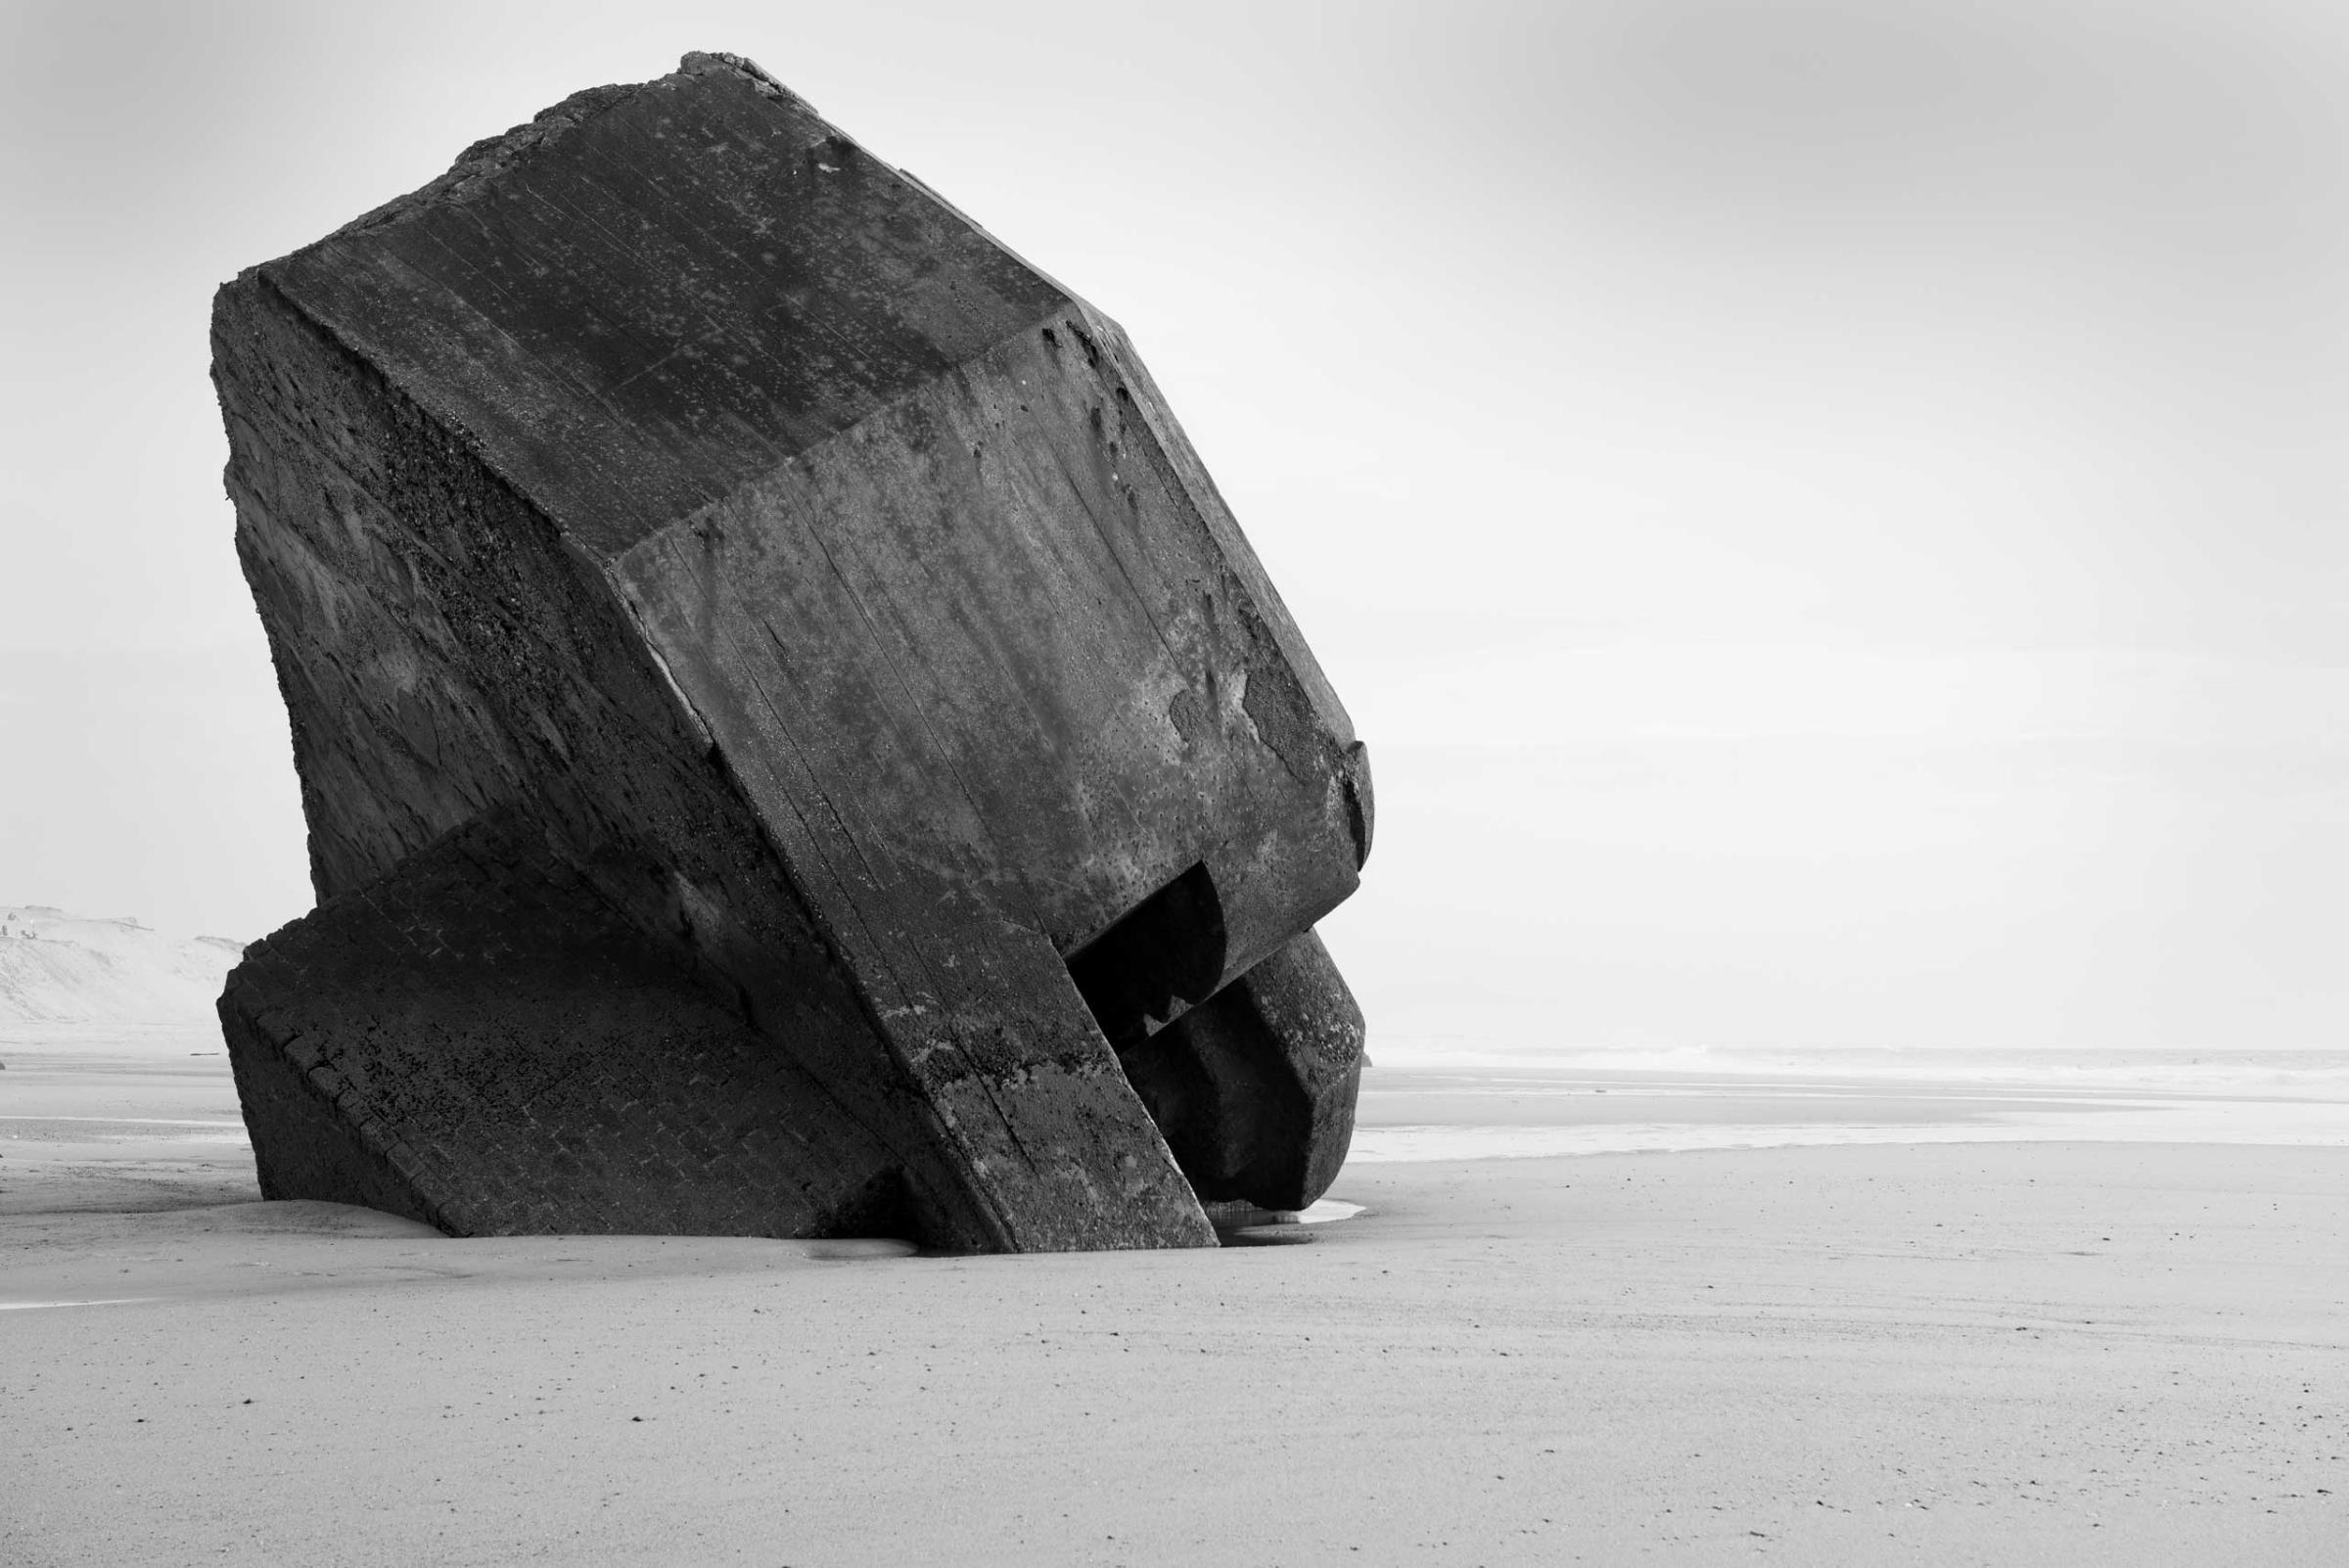 The remnants of a concrete defensive structure used by the German Army during World War II juts out of the sand along a beach in nothern France along the route of the Atlantic Wall (Atlantikwall in German).